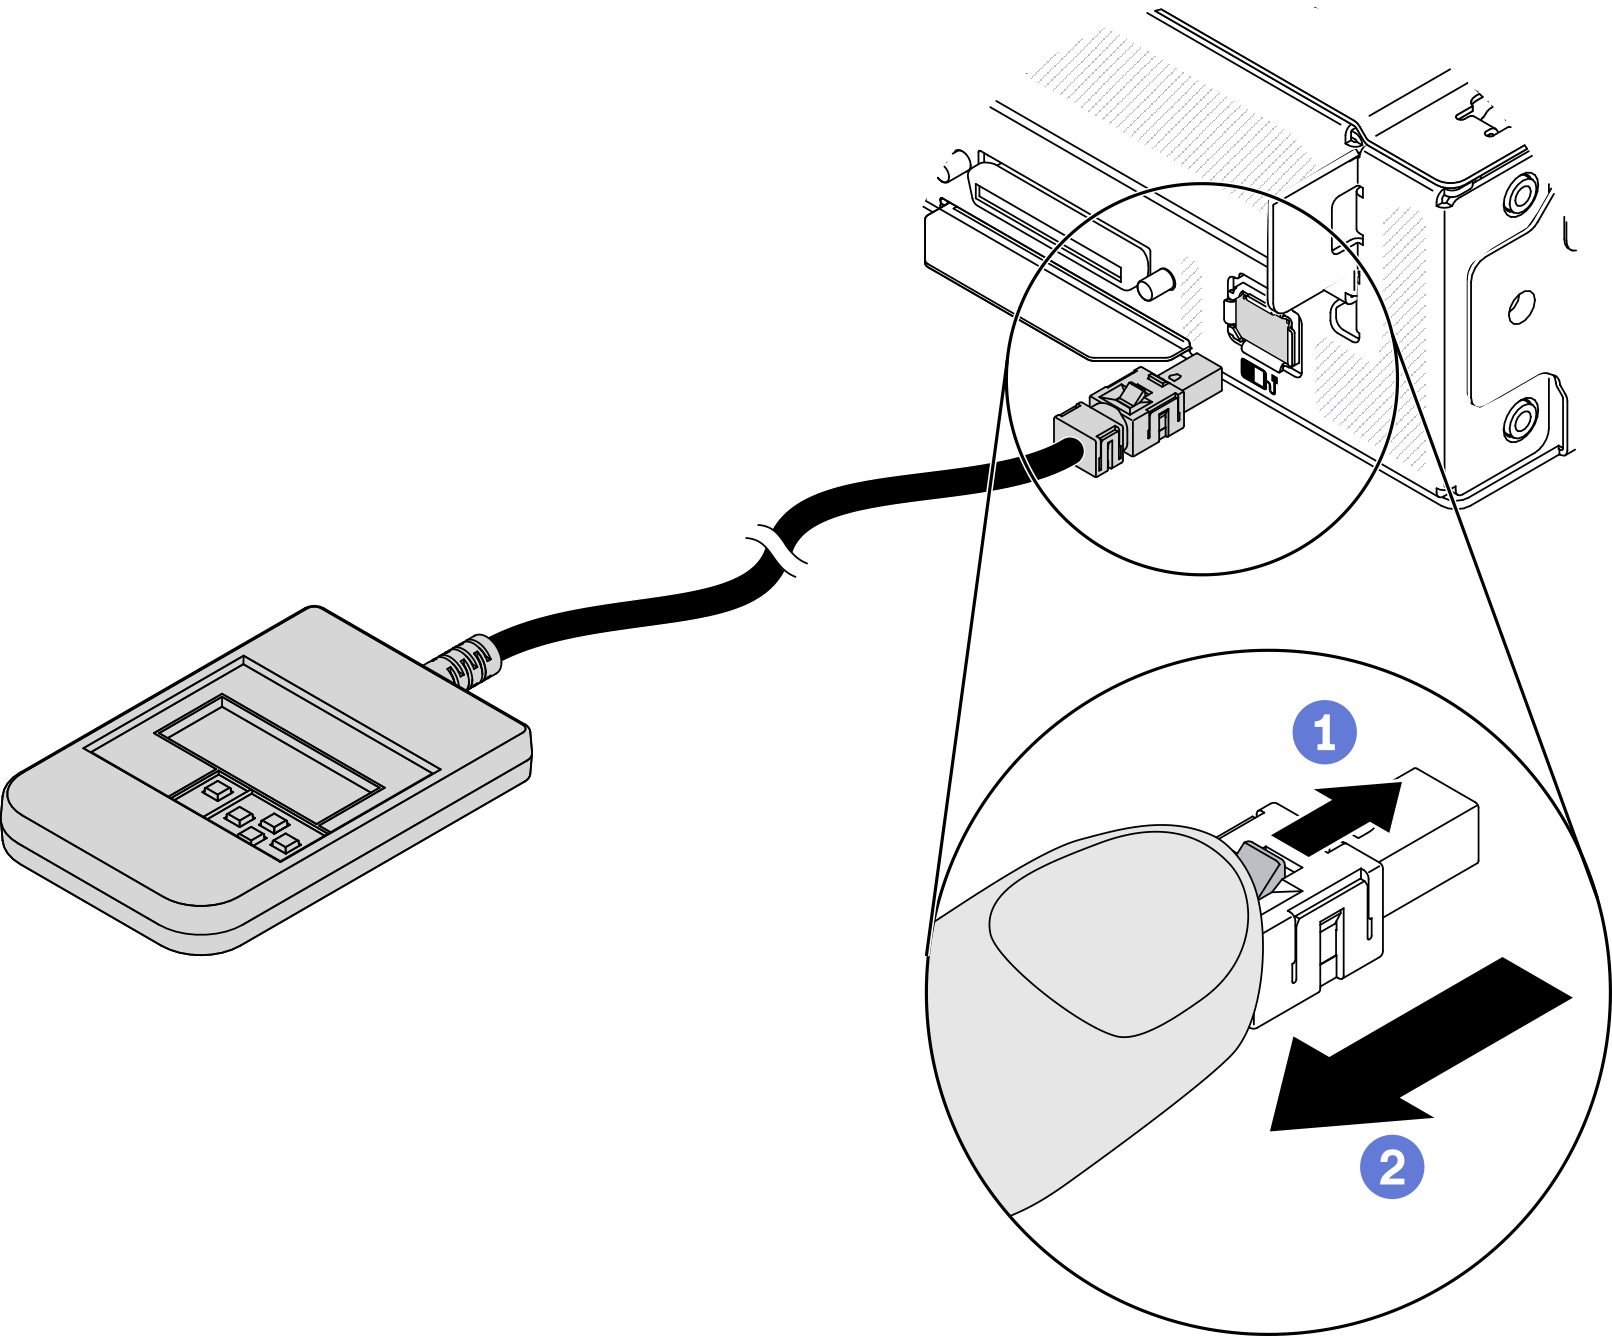 Disconnecting the external LCD diagnostics handset cable